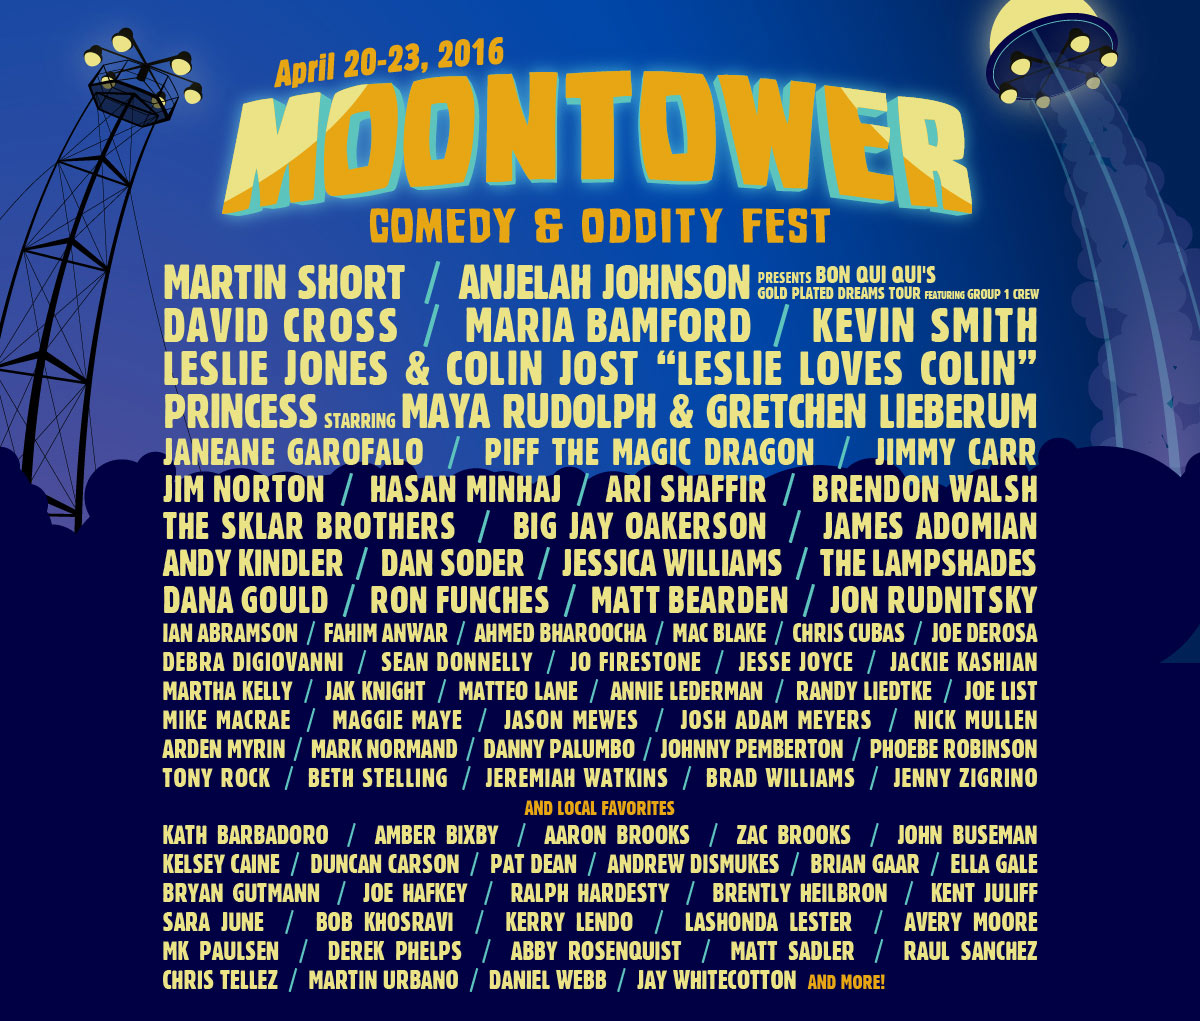 Moon tower comedy fest 1